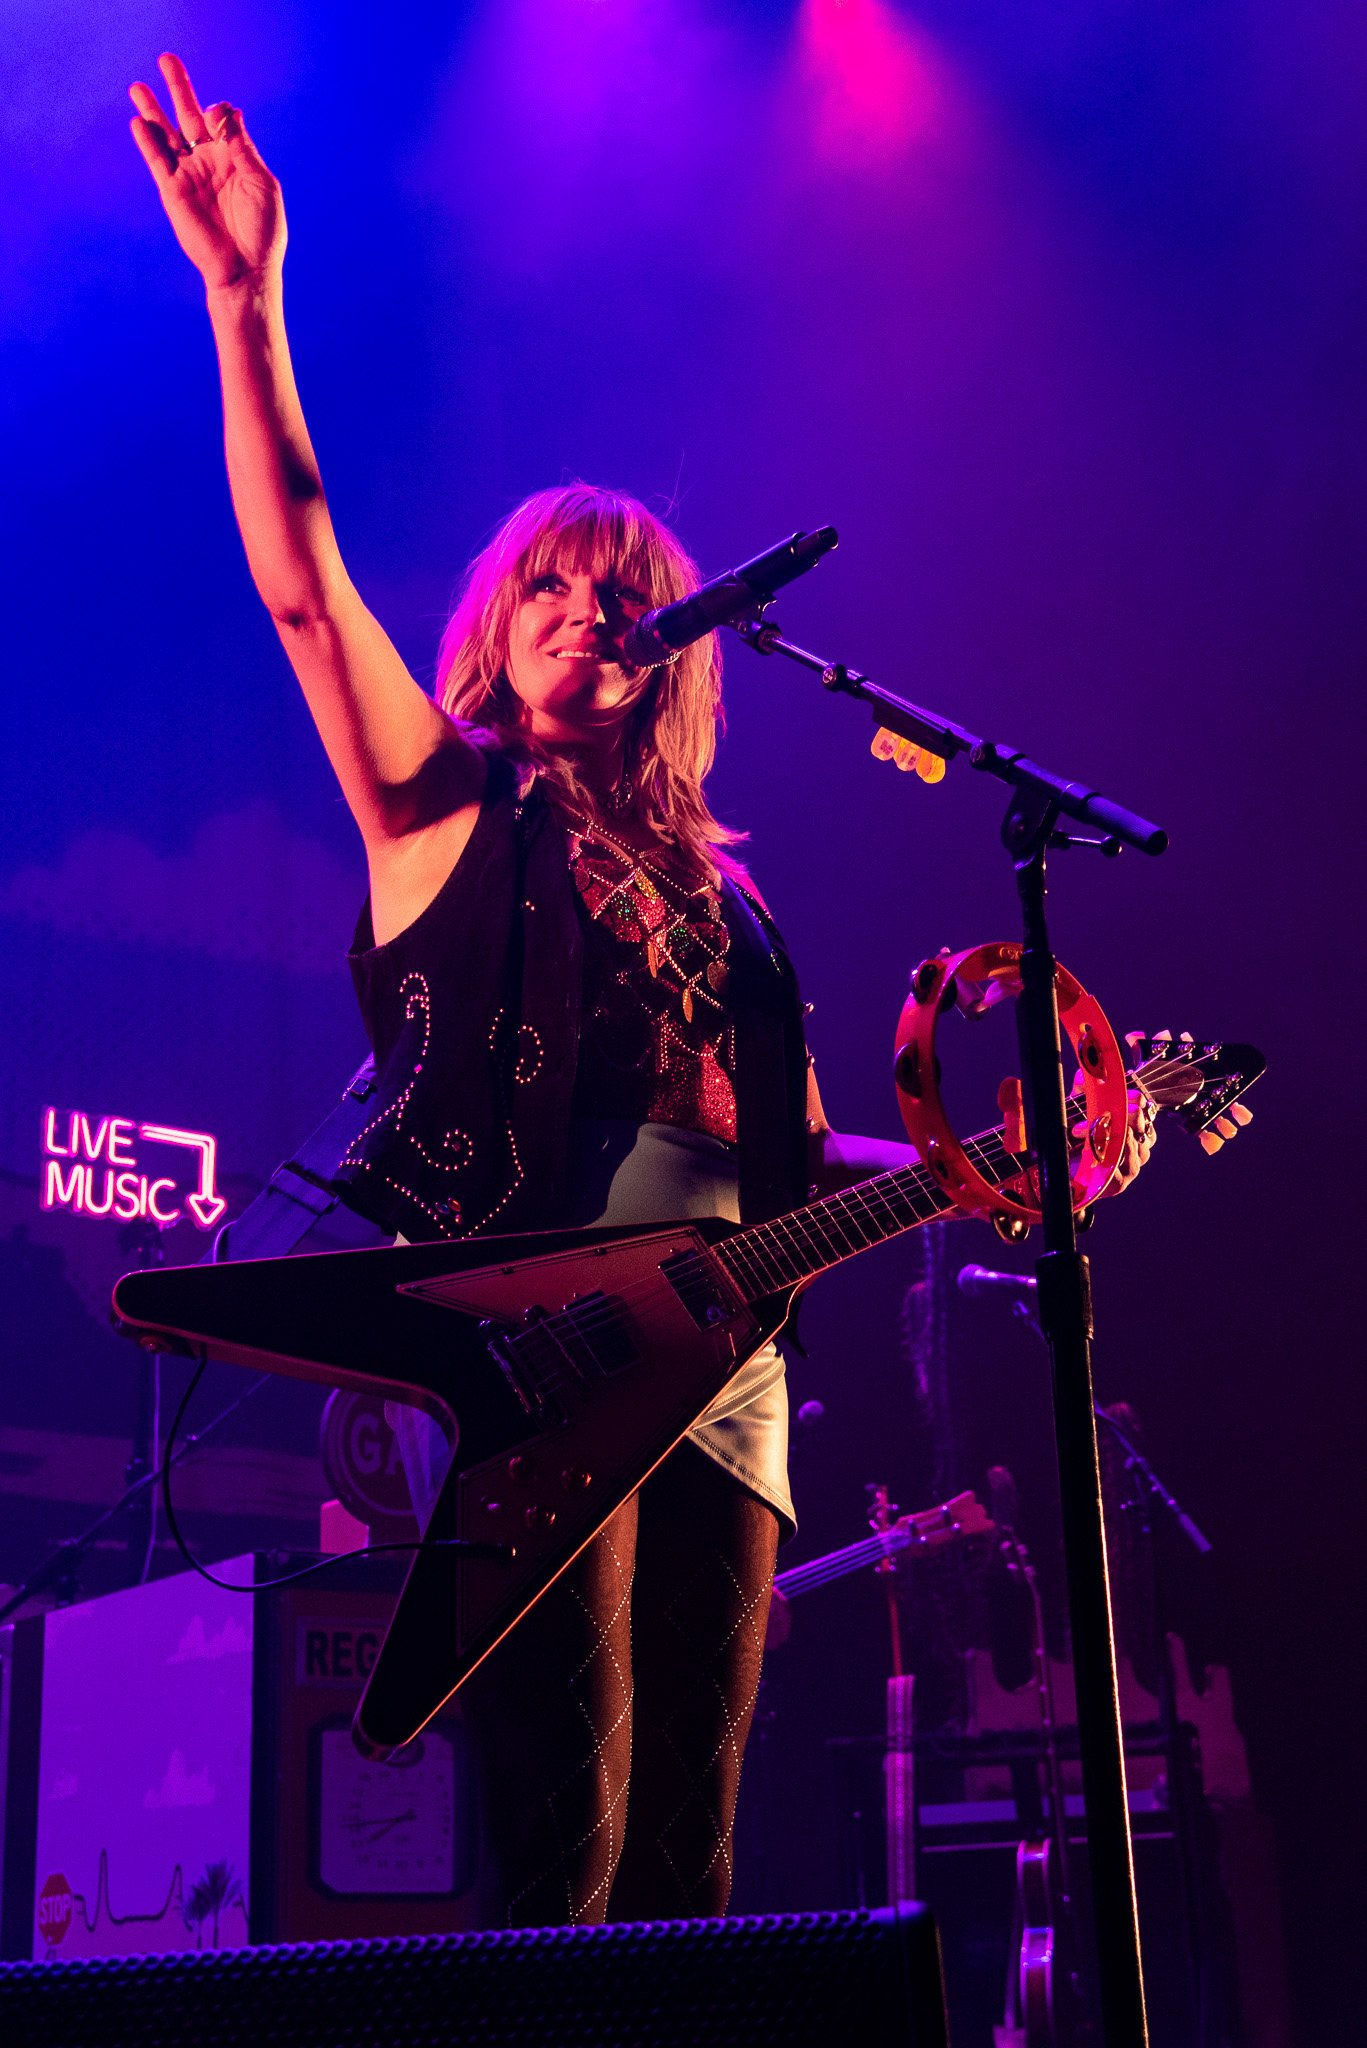  Waving to the crowd, Grace Potter begins the next song of her set, “Medicine”.  